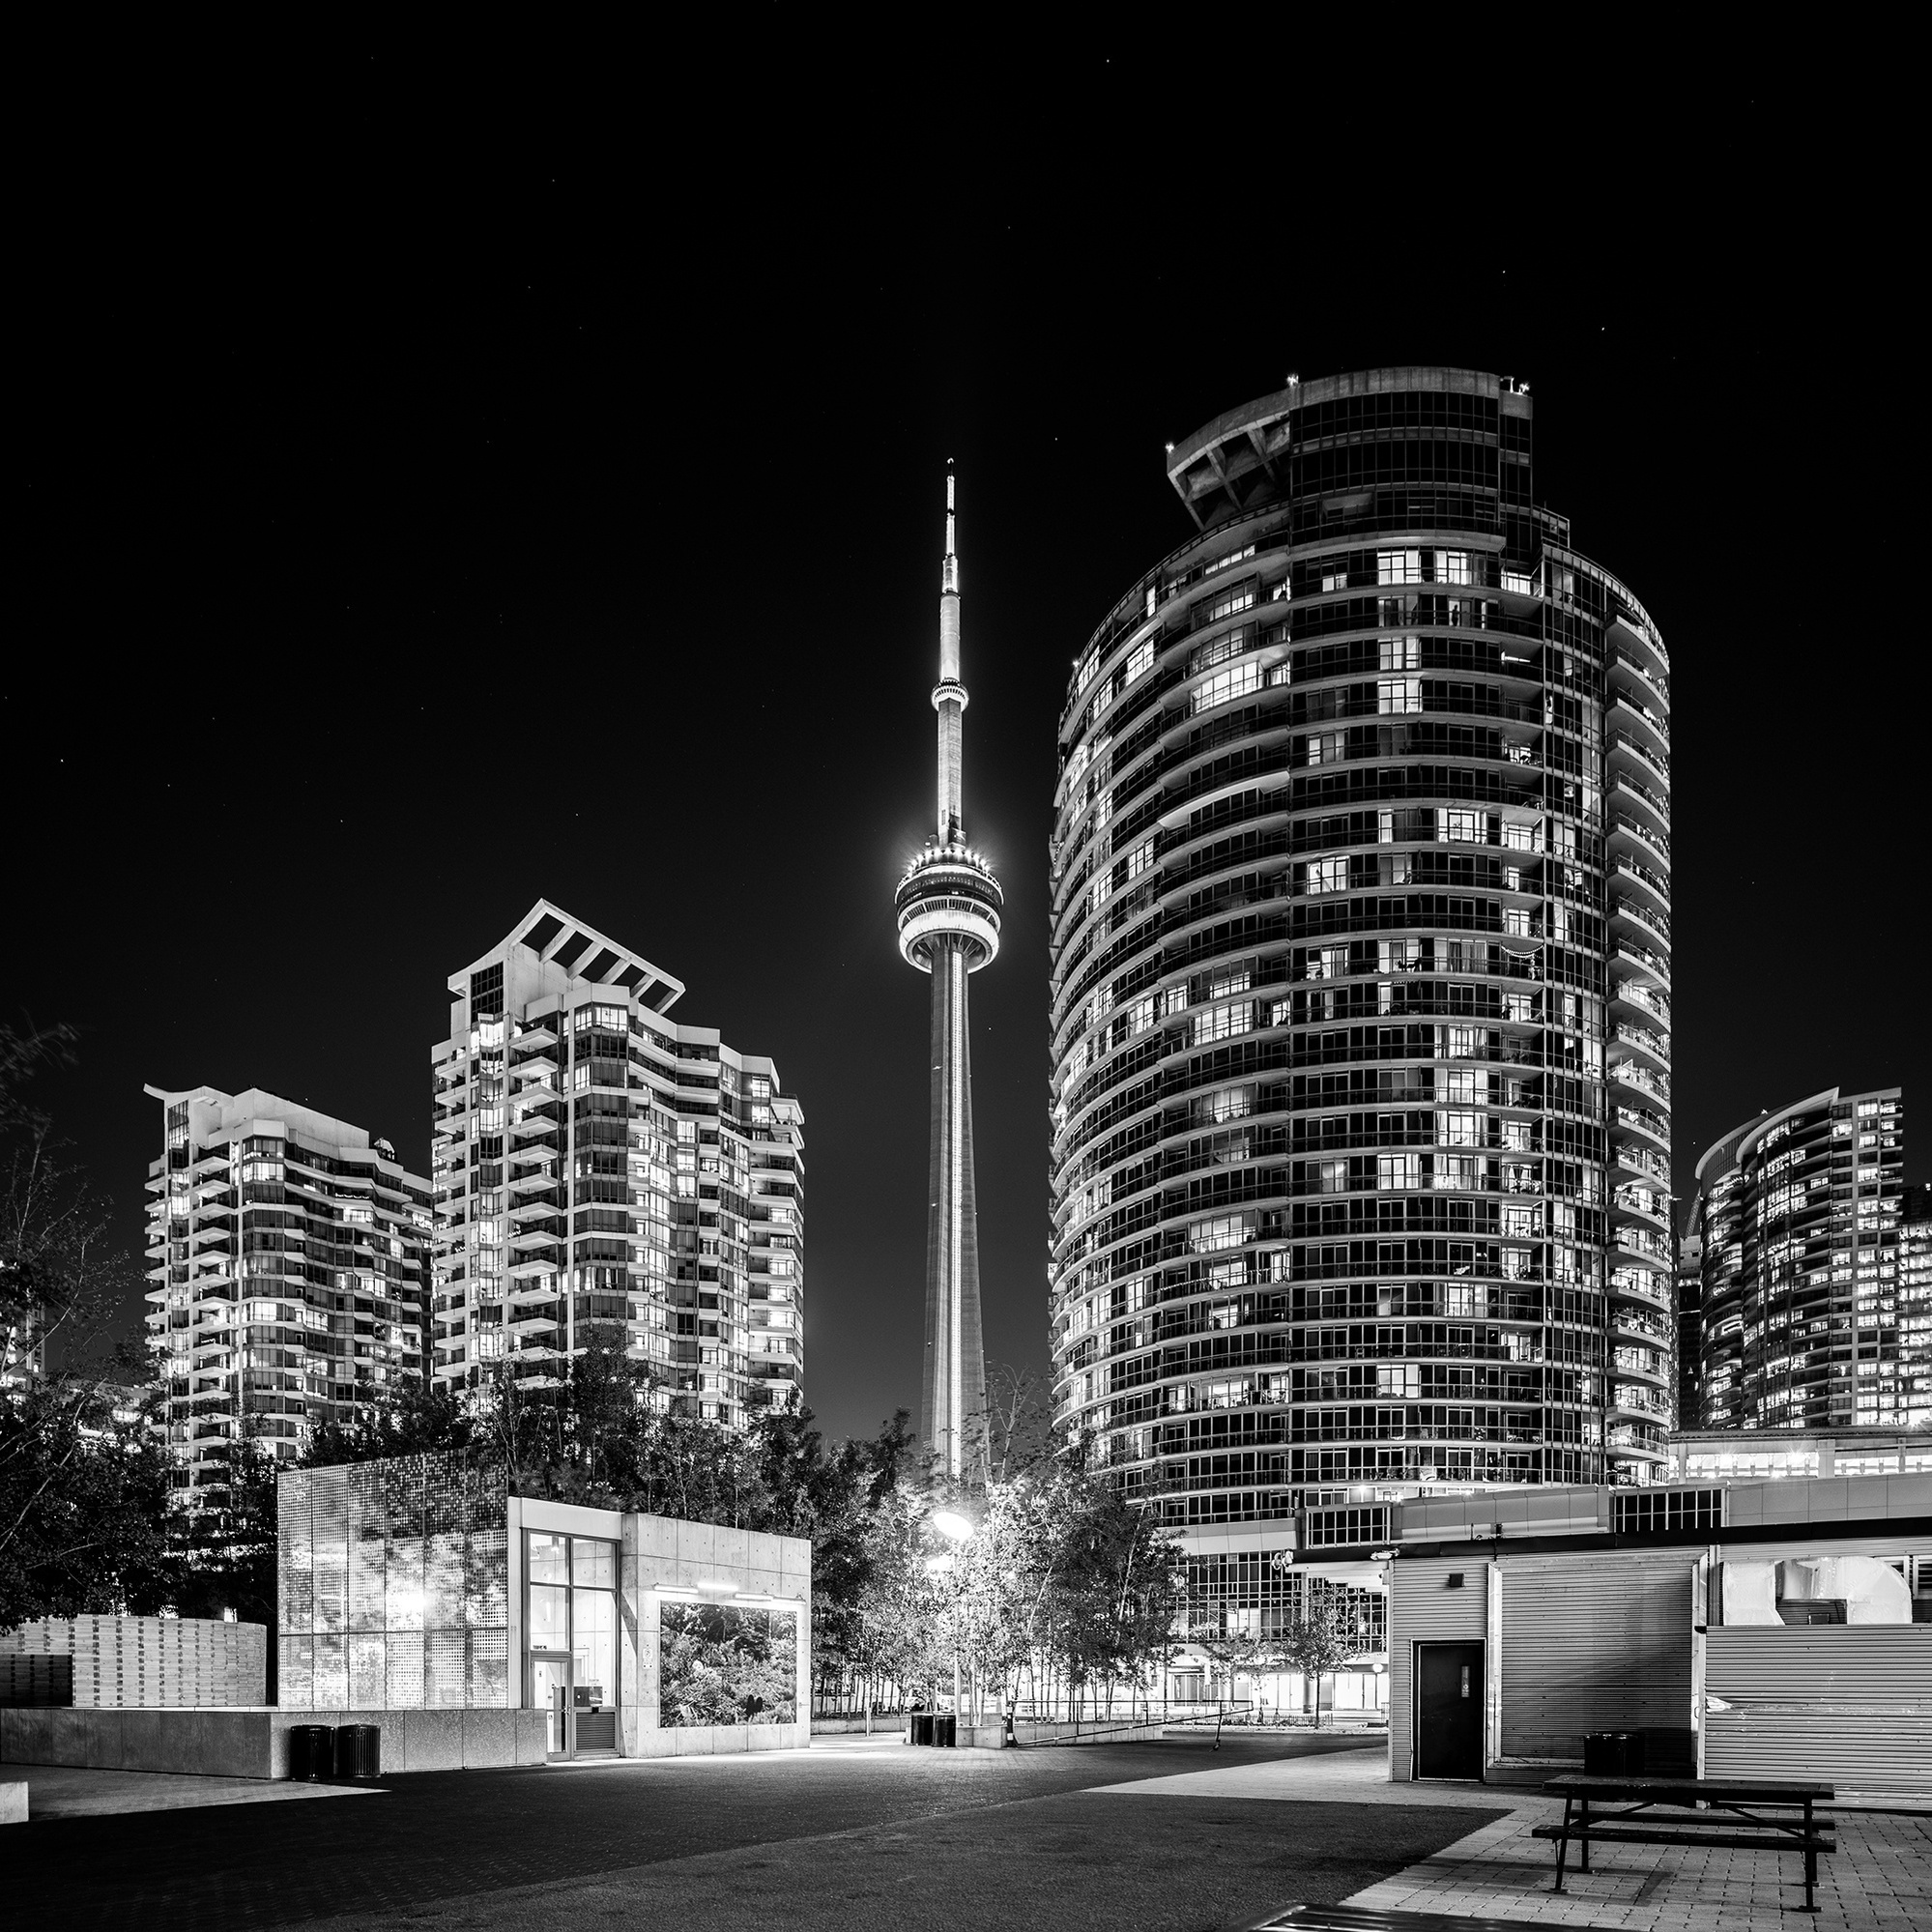 Photograph of CN Tower and condos in black and white from the Toronto Waterfront by Ontario Architectural  Photographer Frank Fenn IDEA3